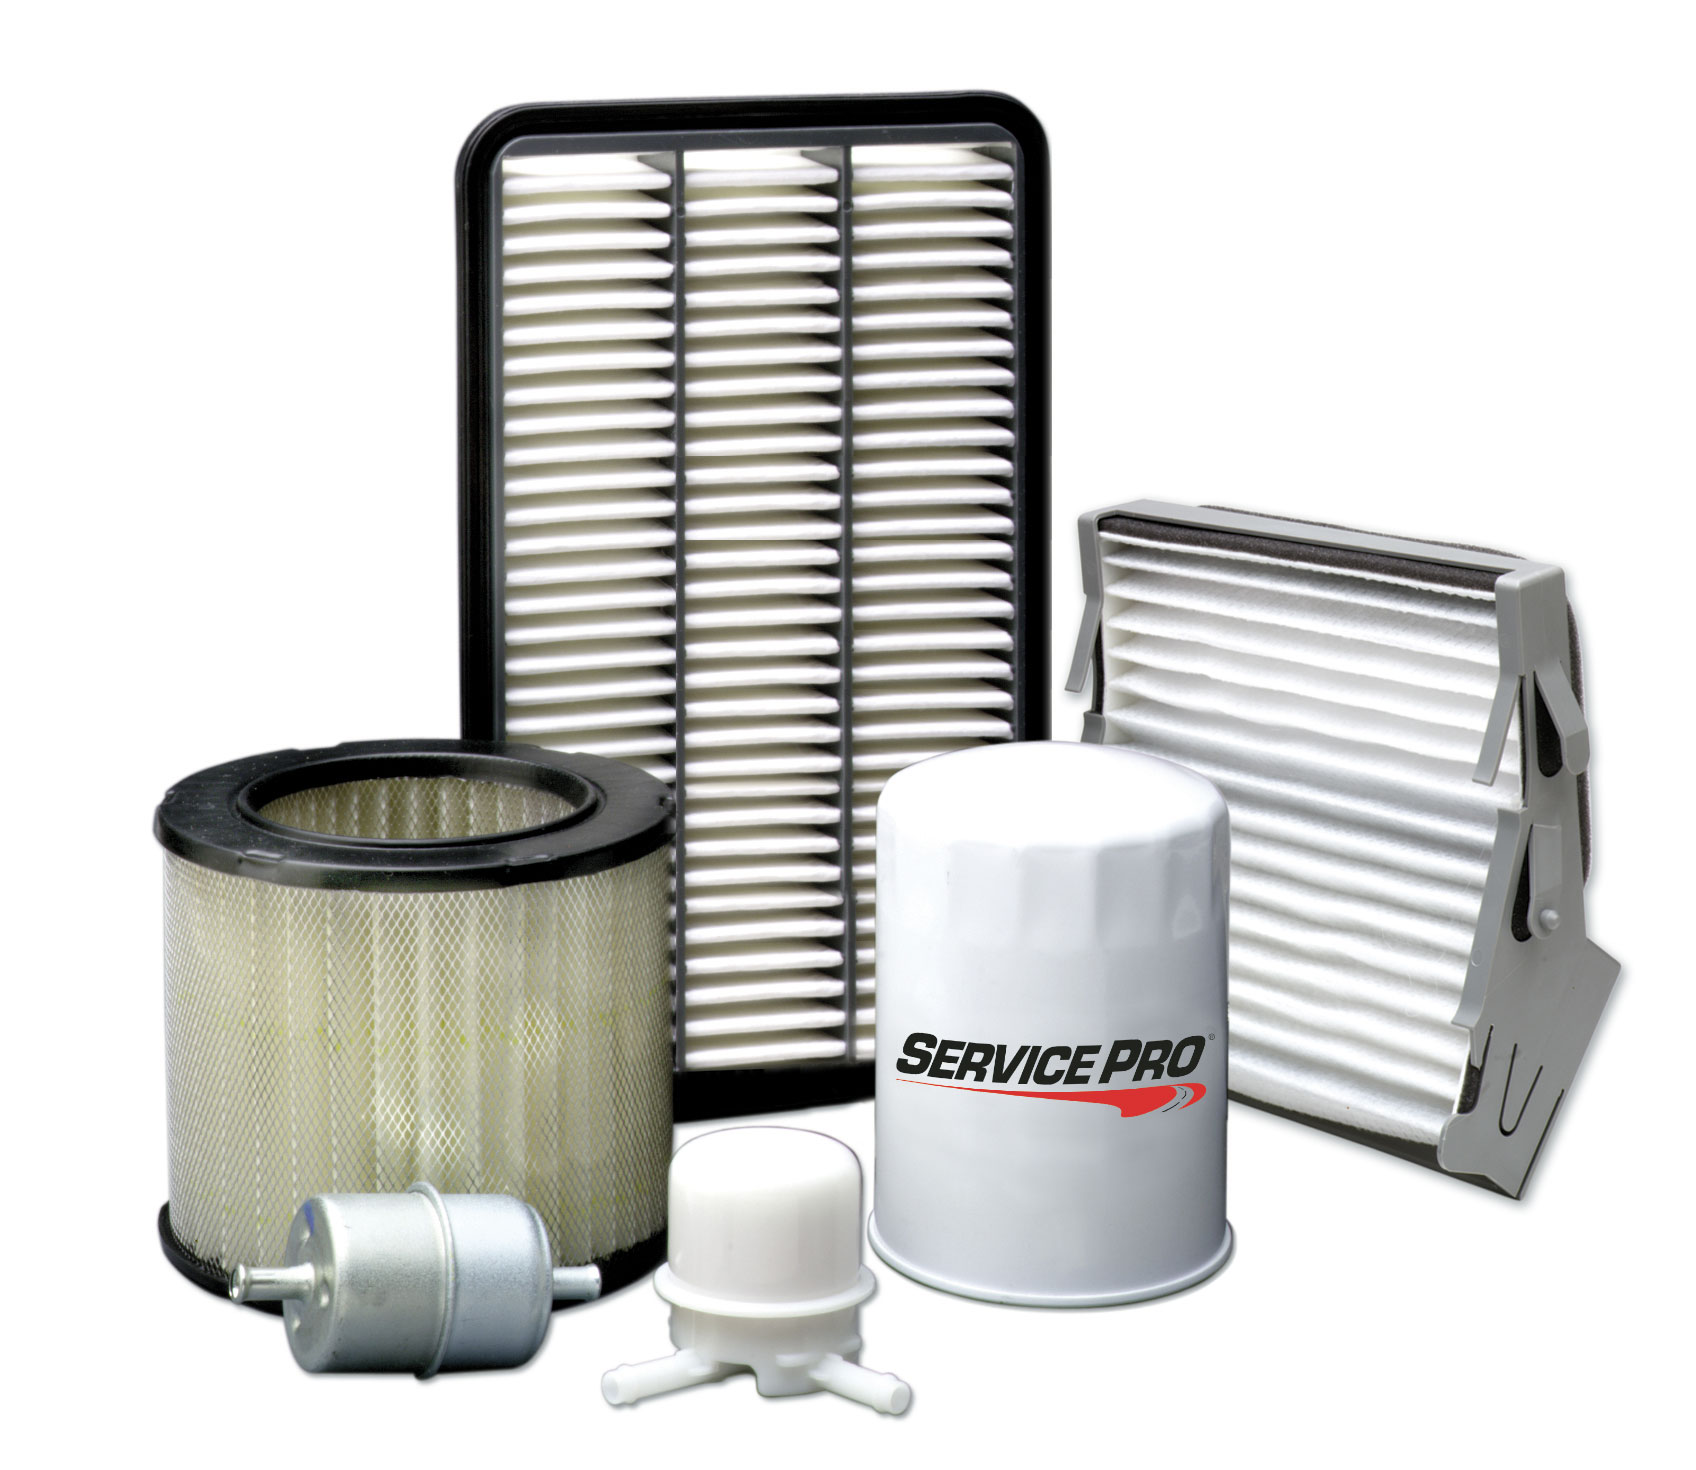 FILTER-OIL #E5564 SVC PRO 
EXTENDED PROTECTION